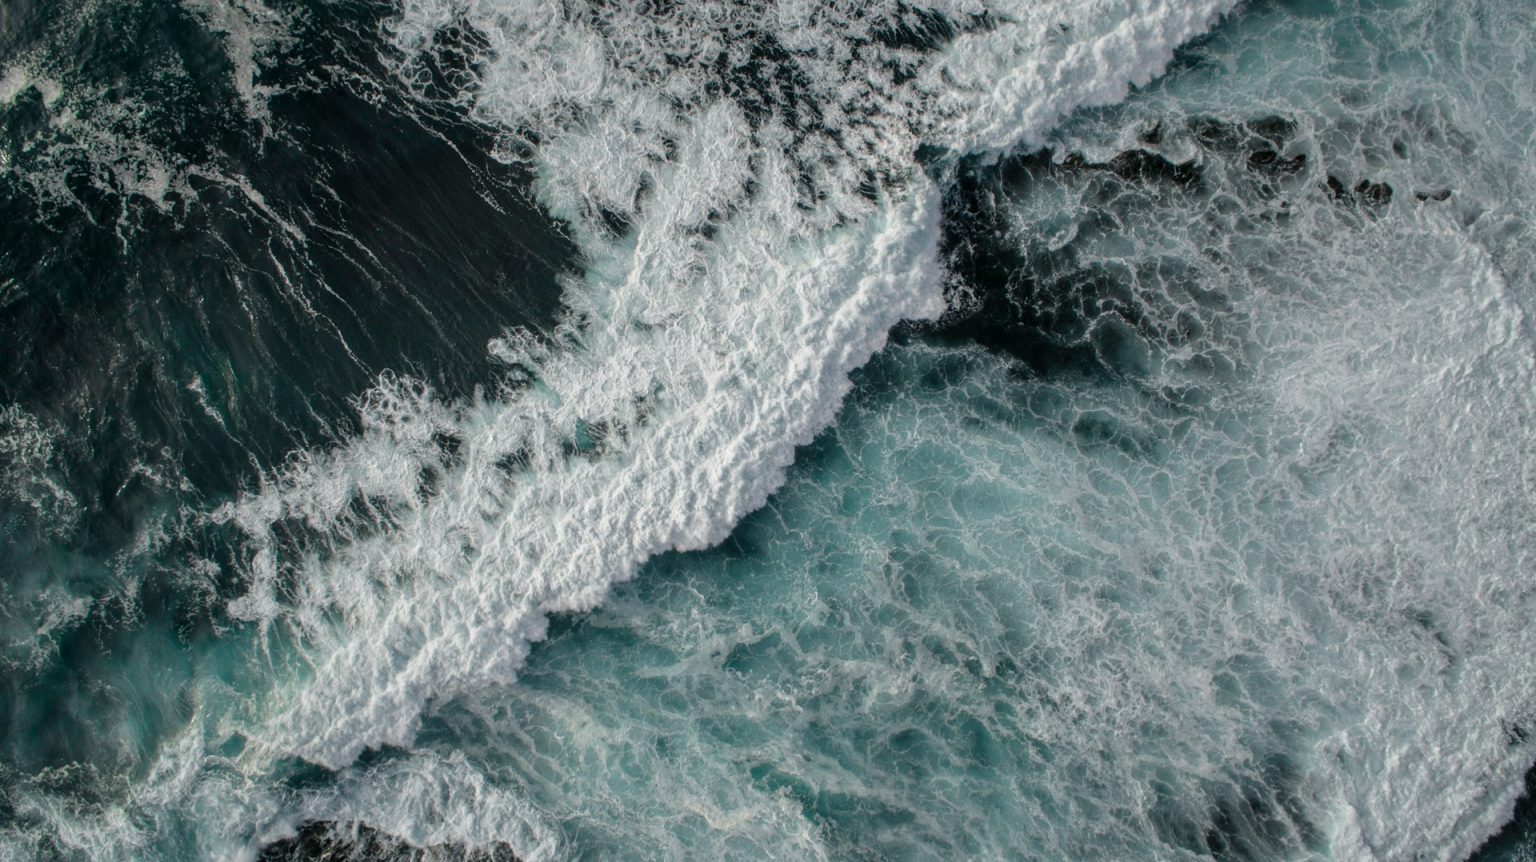 Aerial view of ocean waves crashing and foaming, creating a turbulent pattern in the dark and light blue water.